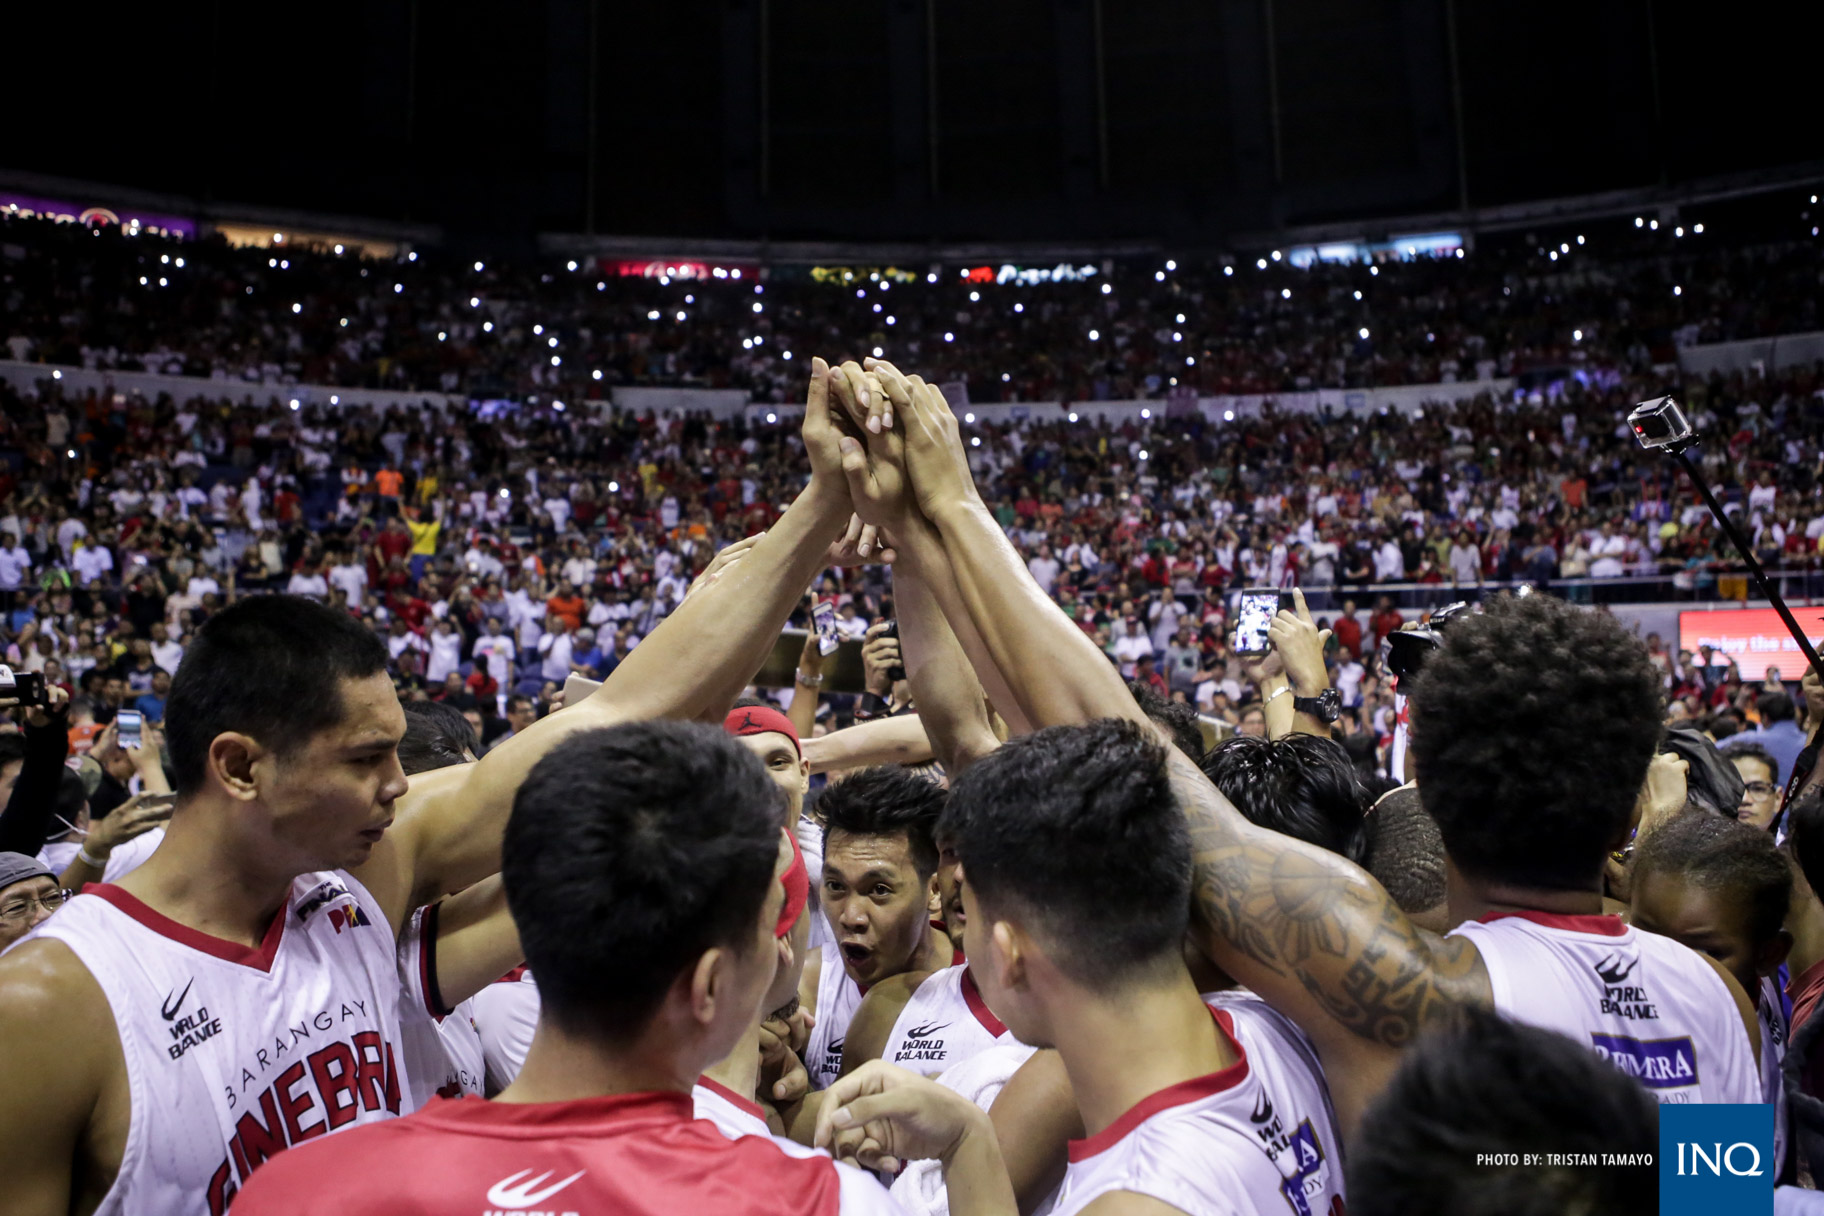 Ginebra celebrates after ending an eight-year title drought and bagging the 2016 PBA Governors' Cup Wednesday. Photo by Tristan Tamayo/INQUIRER.net